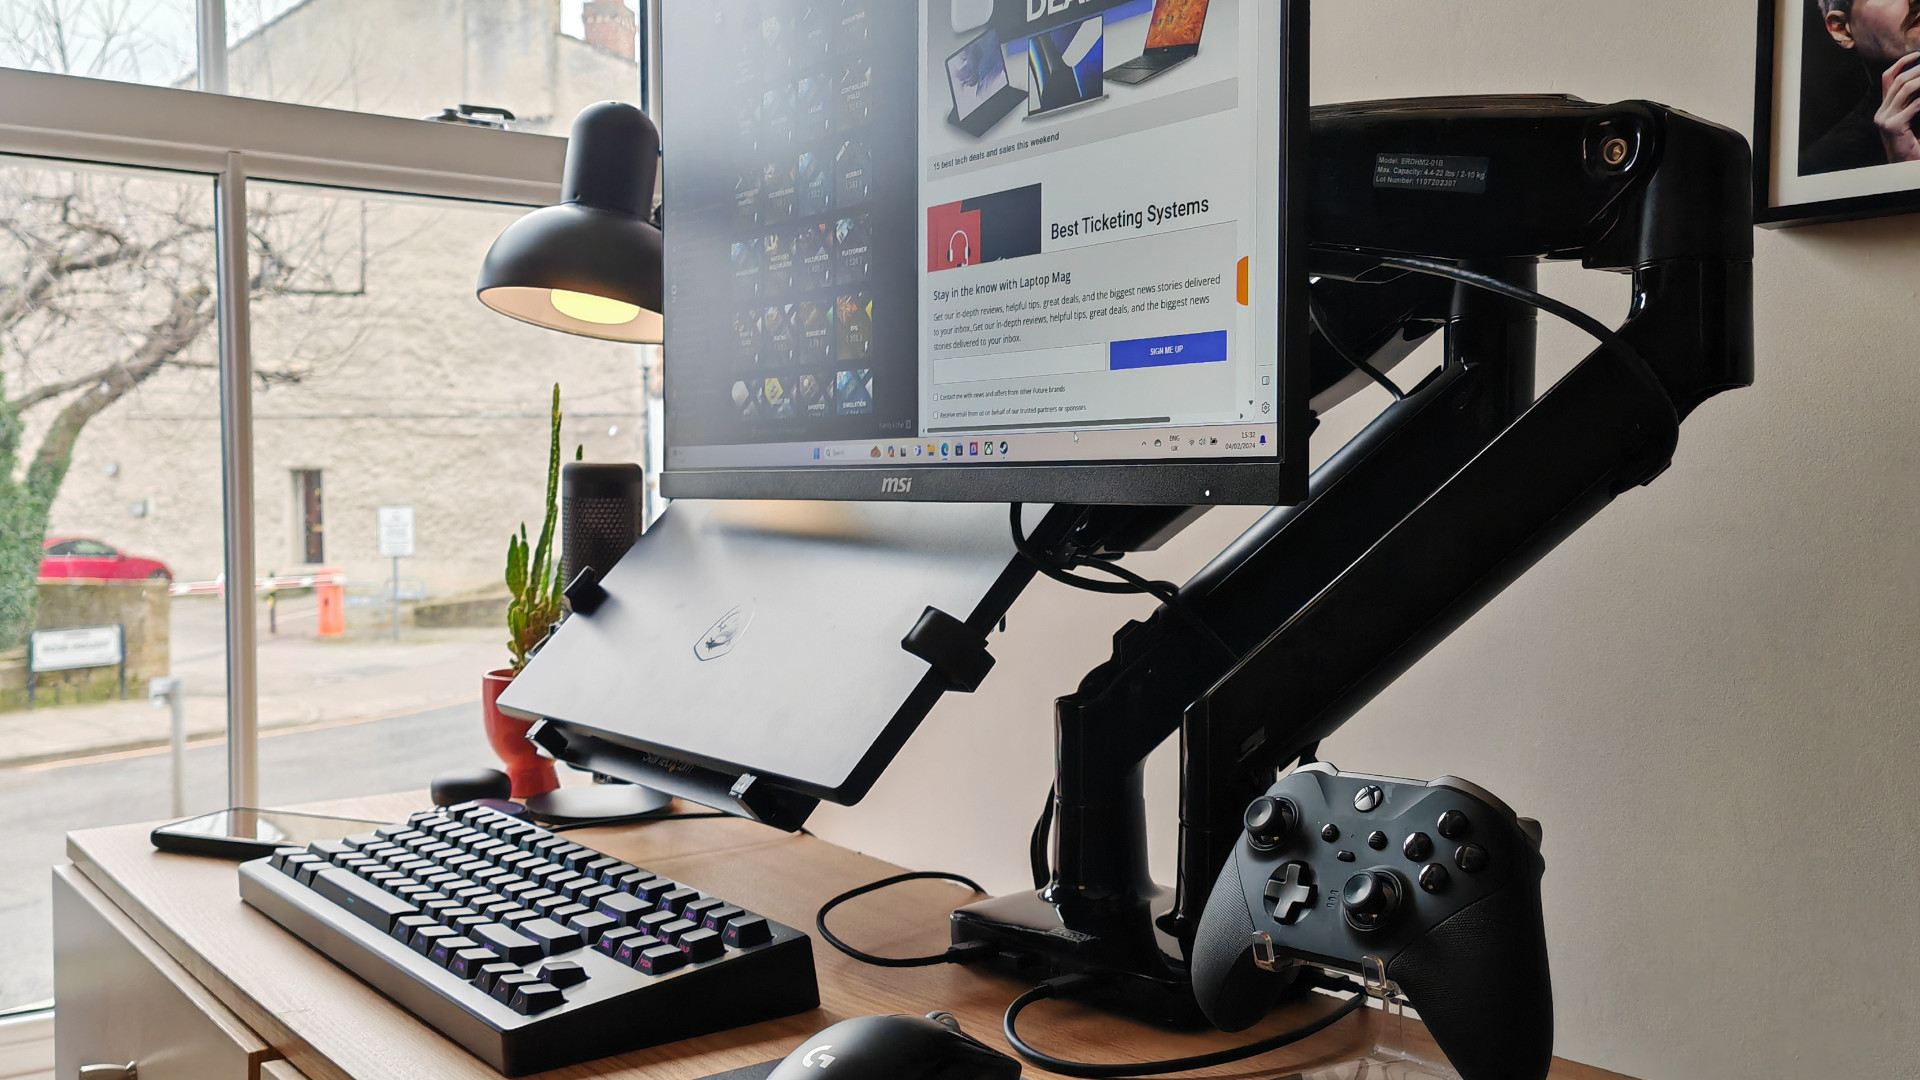 ErgoAV Motion Desk Mount with docking station, dual arm monitor stand with USB-C hub review photos